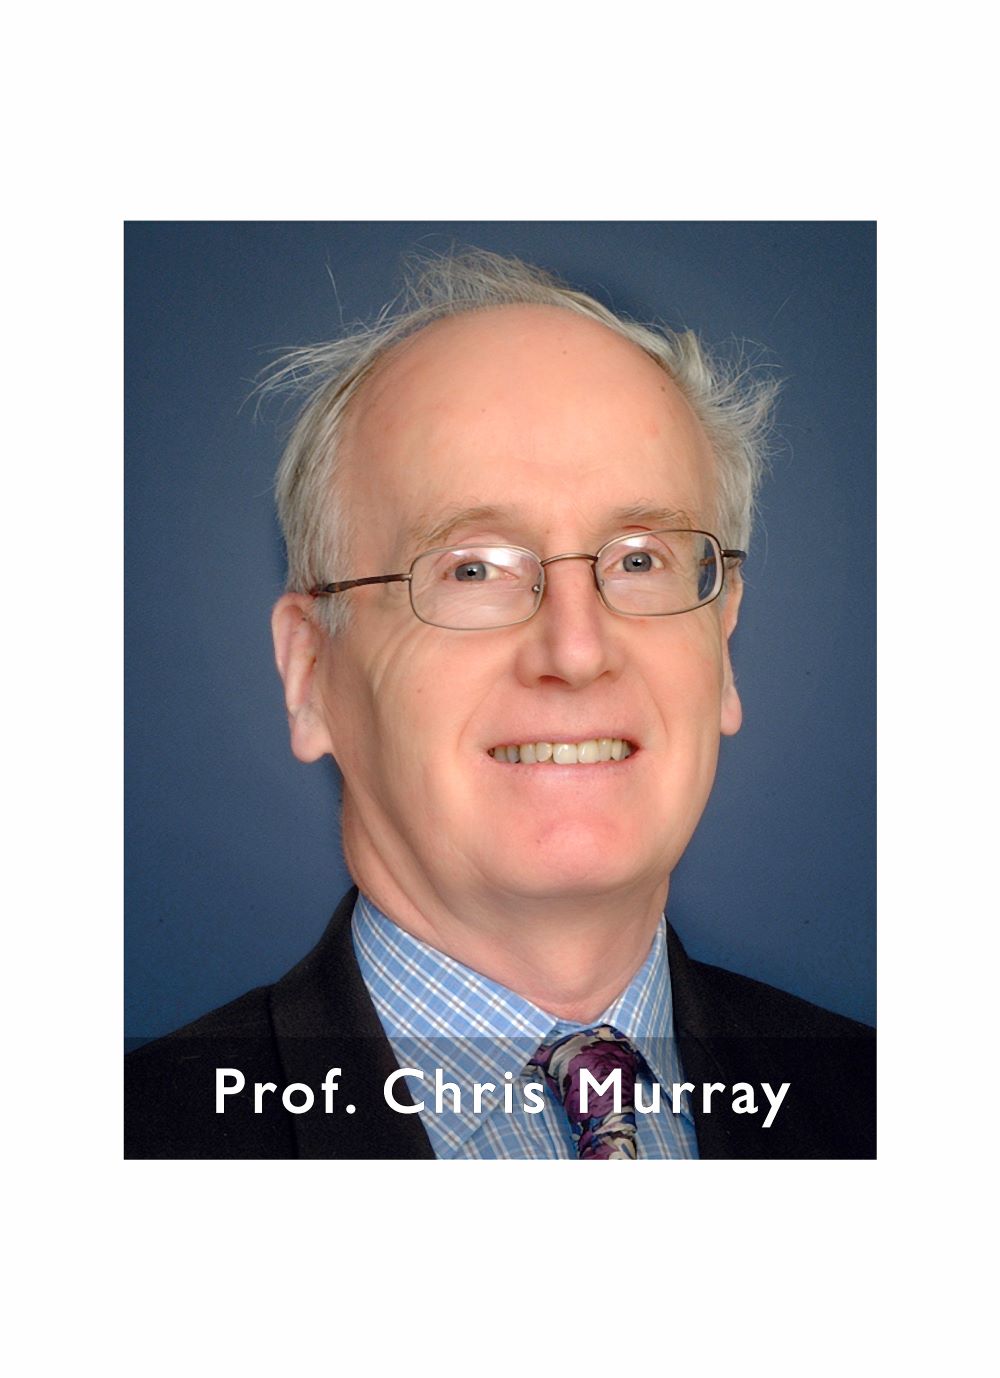 A Tribute to Professor Christopher Murray